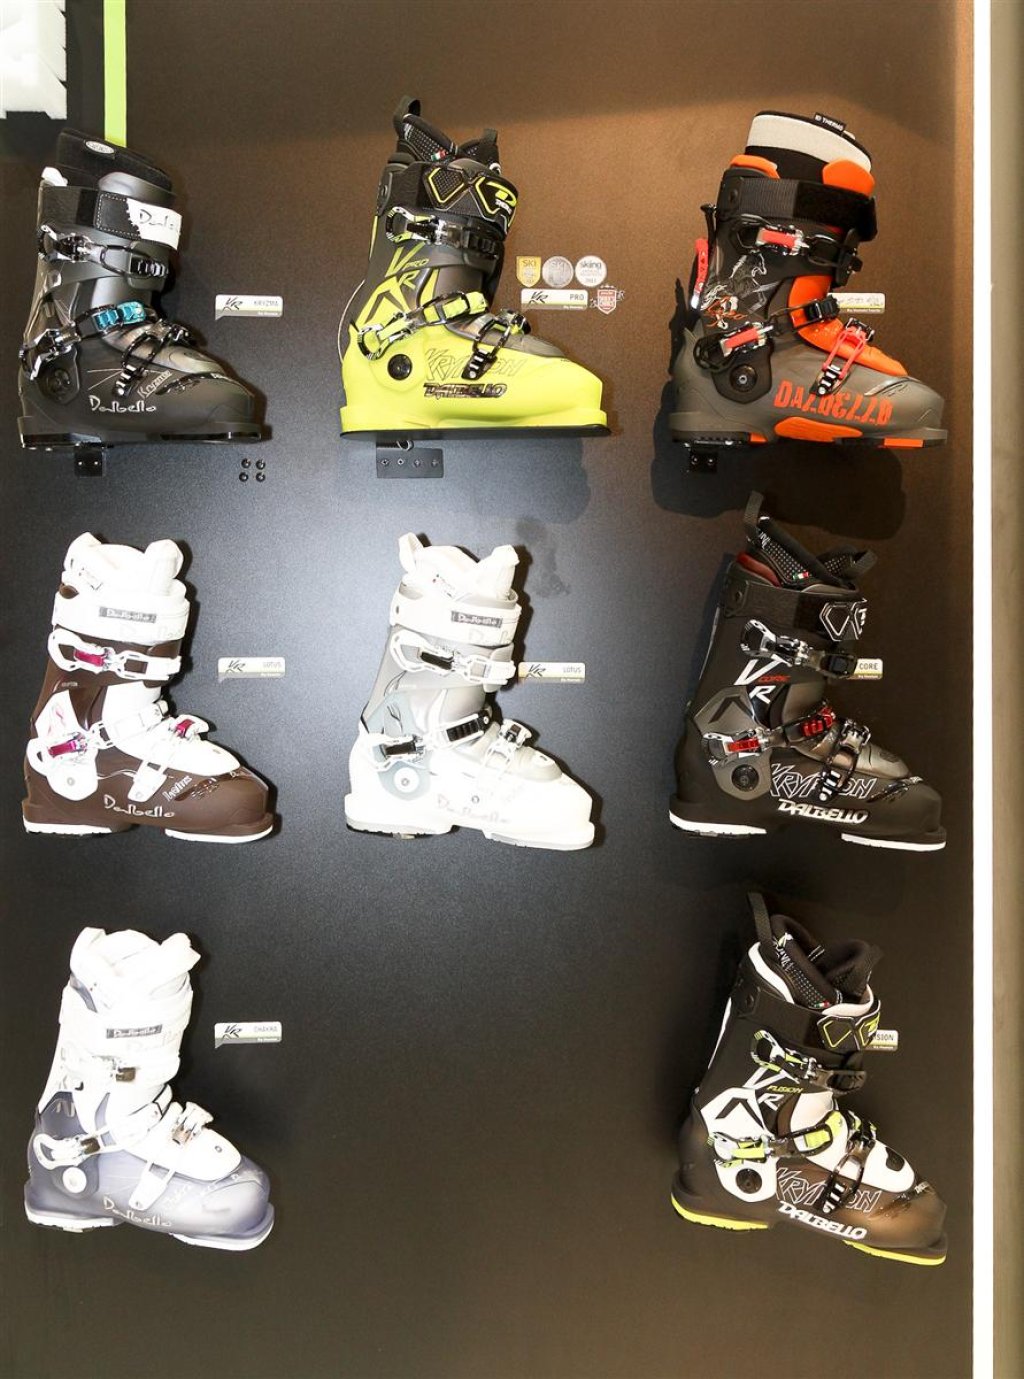 The downhill-oriented boot line from Dalbello